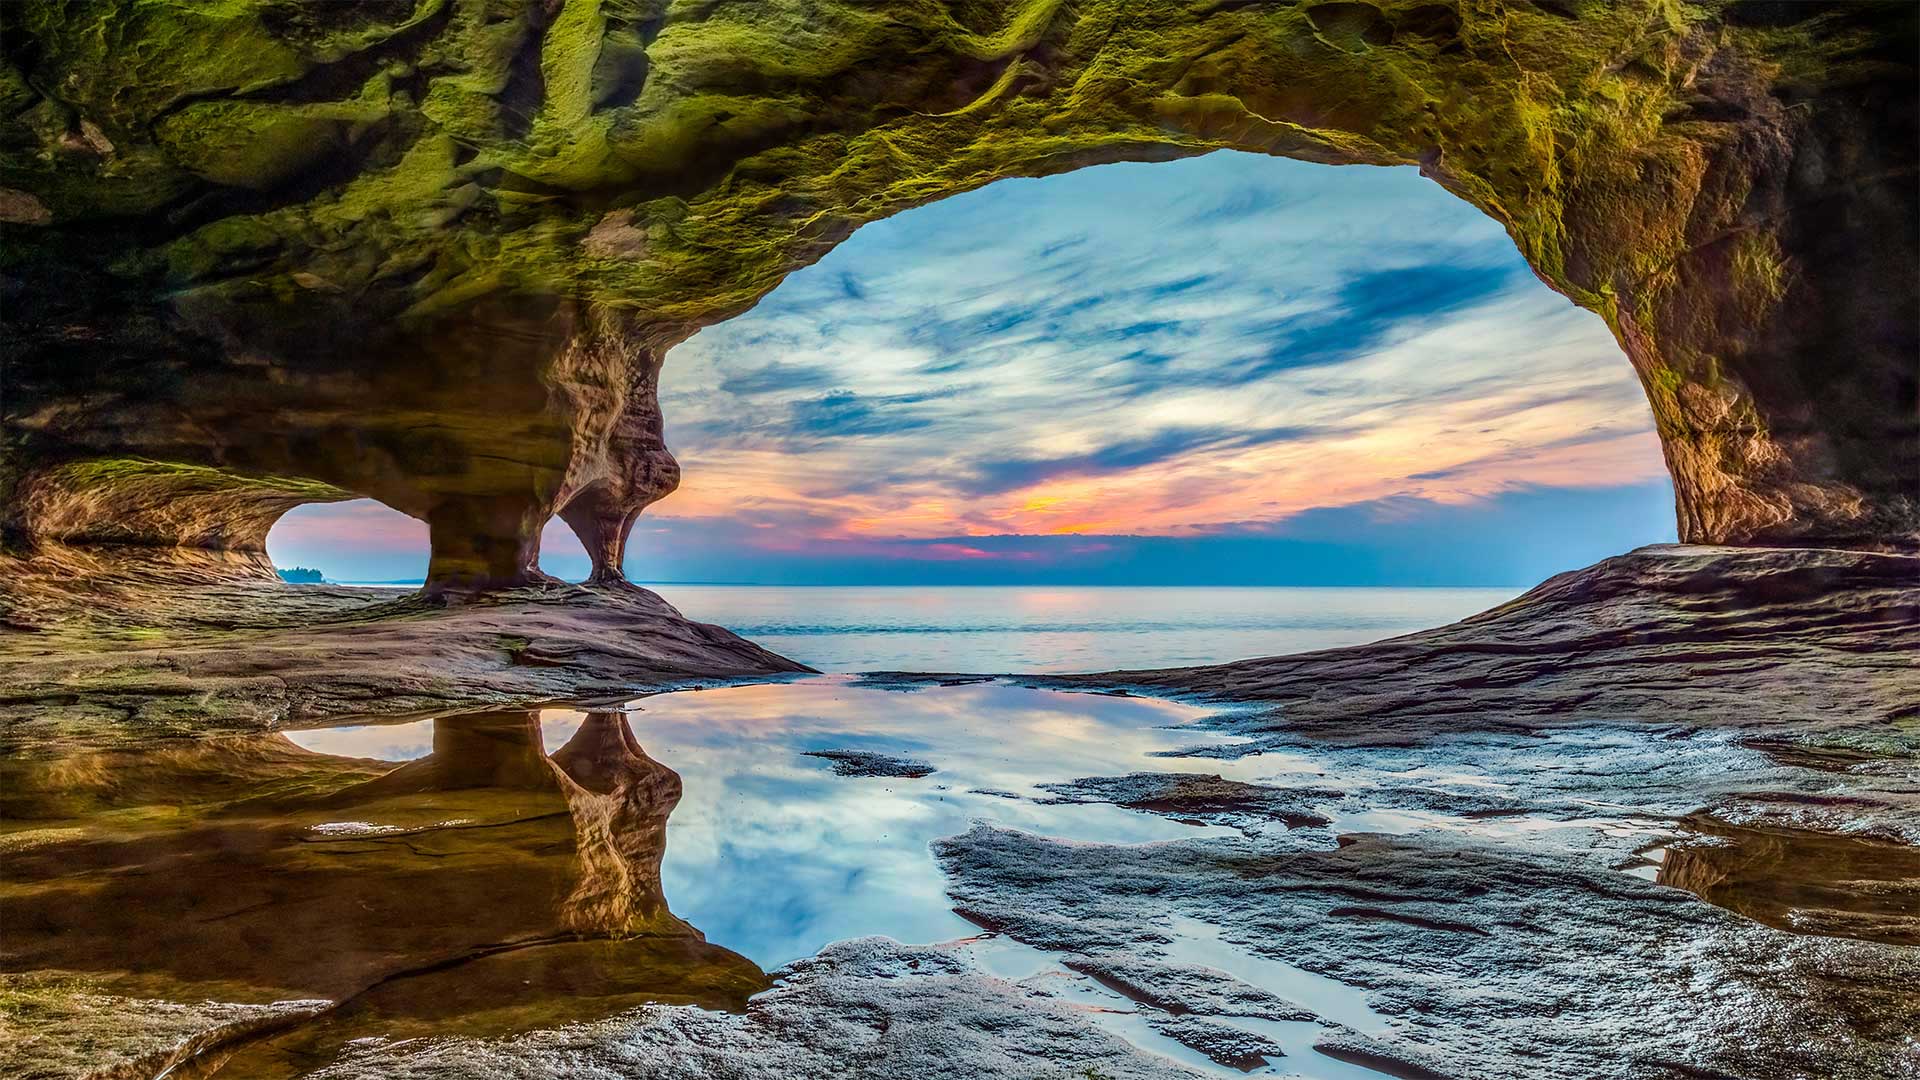 Cavern in Pictured Rocks National Lakeshore on Lake Superior, Michigan - Kenneth Keifer/Getty Images)